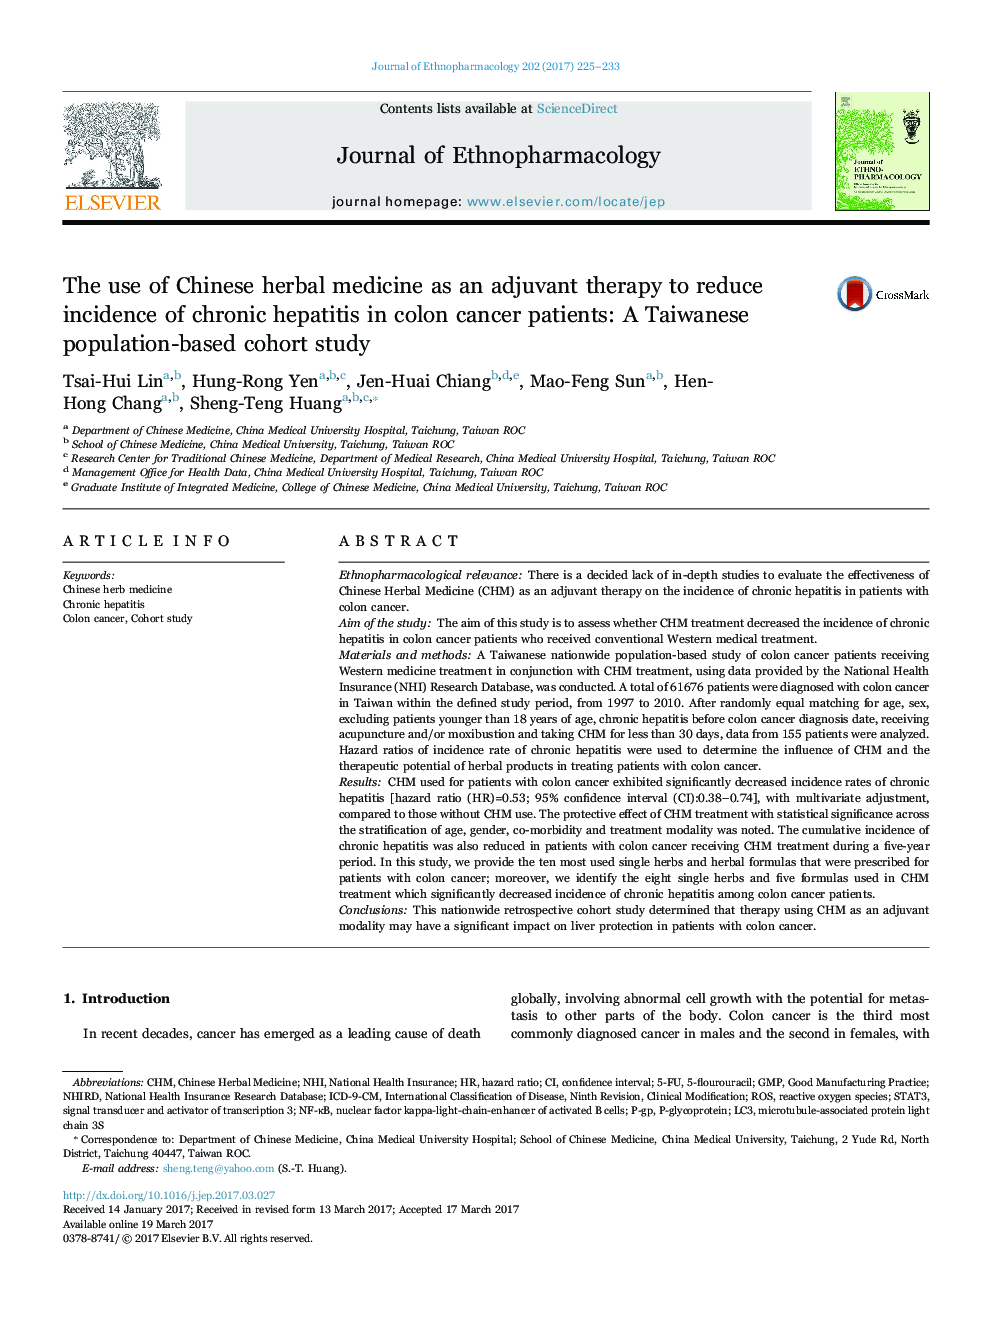 The use of Chinese herbal medicine as an adjuvant therapy to reduce incidence of chronic hepatitis in colon cancer patients: A Taiwanese population-based cohort study